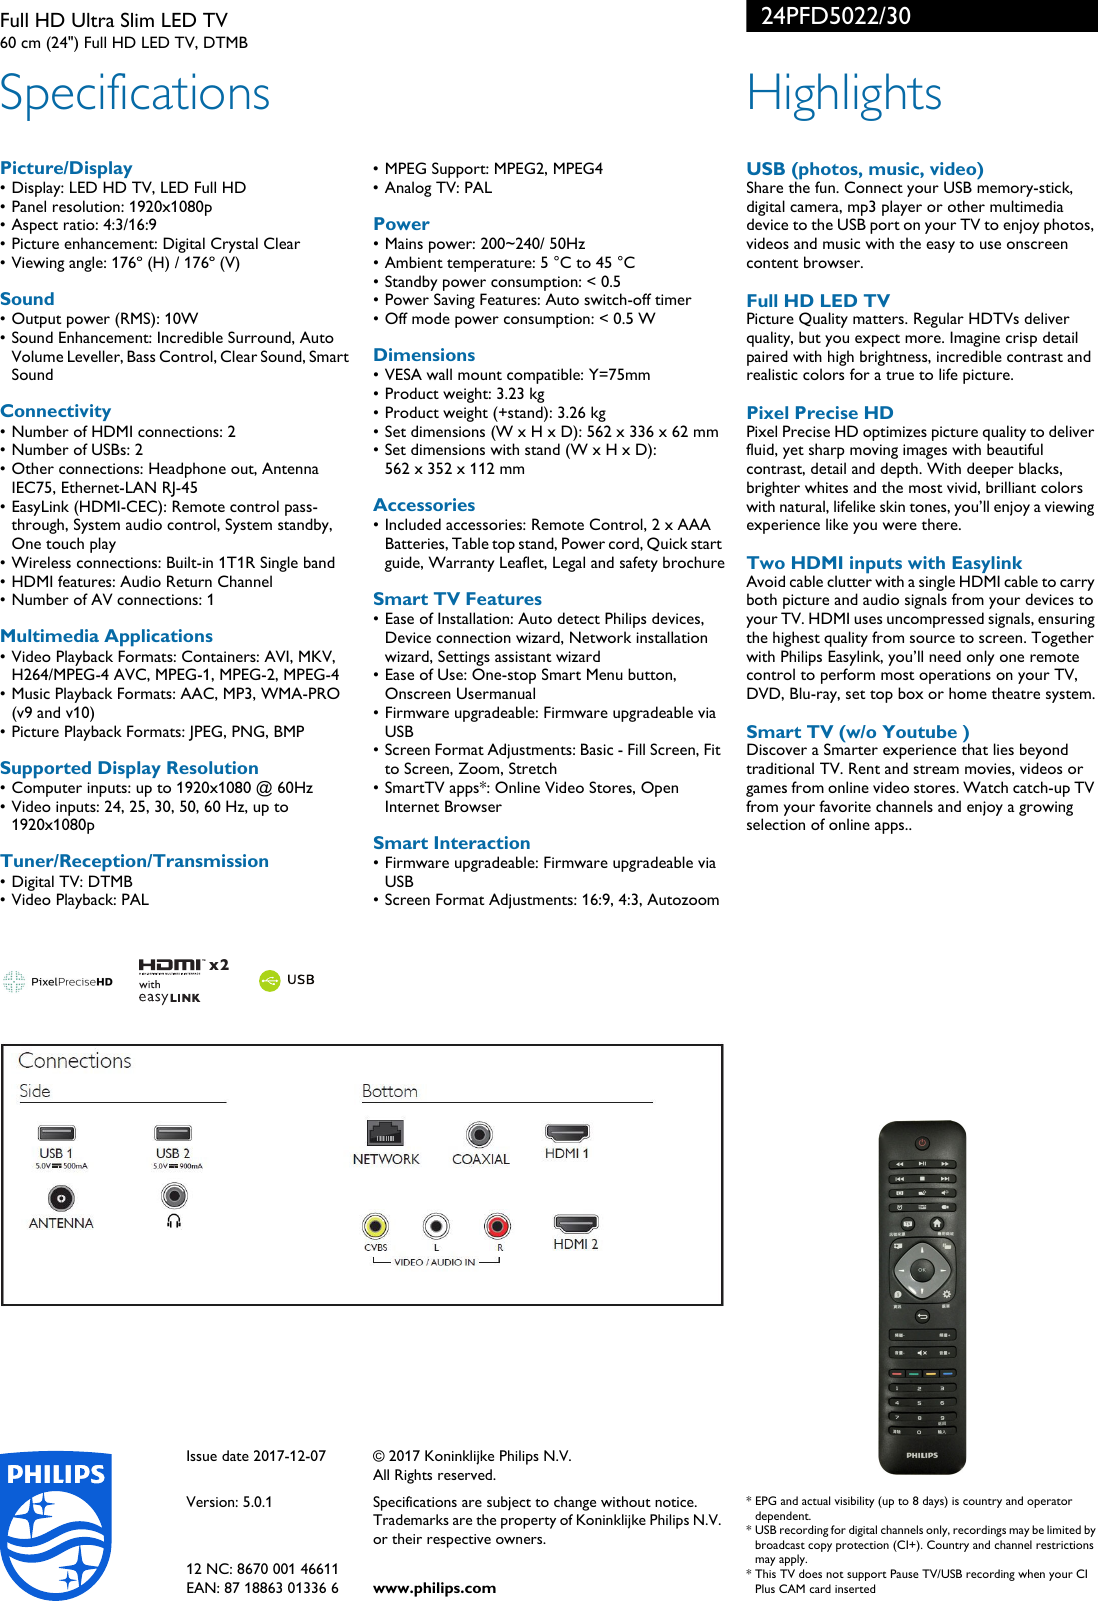 Page 2 of 2 - Philips 24PFD5022/30 Full HD Ultra Slim LED TV With Pixel Precise User Manual Leaflet 24pfd5022 30 Pss Aenhk